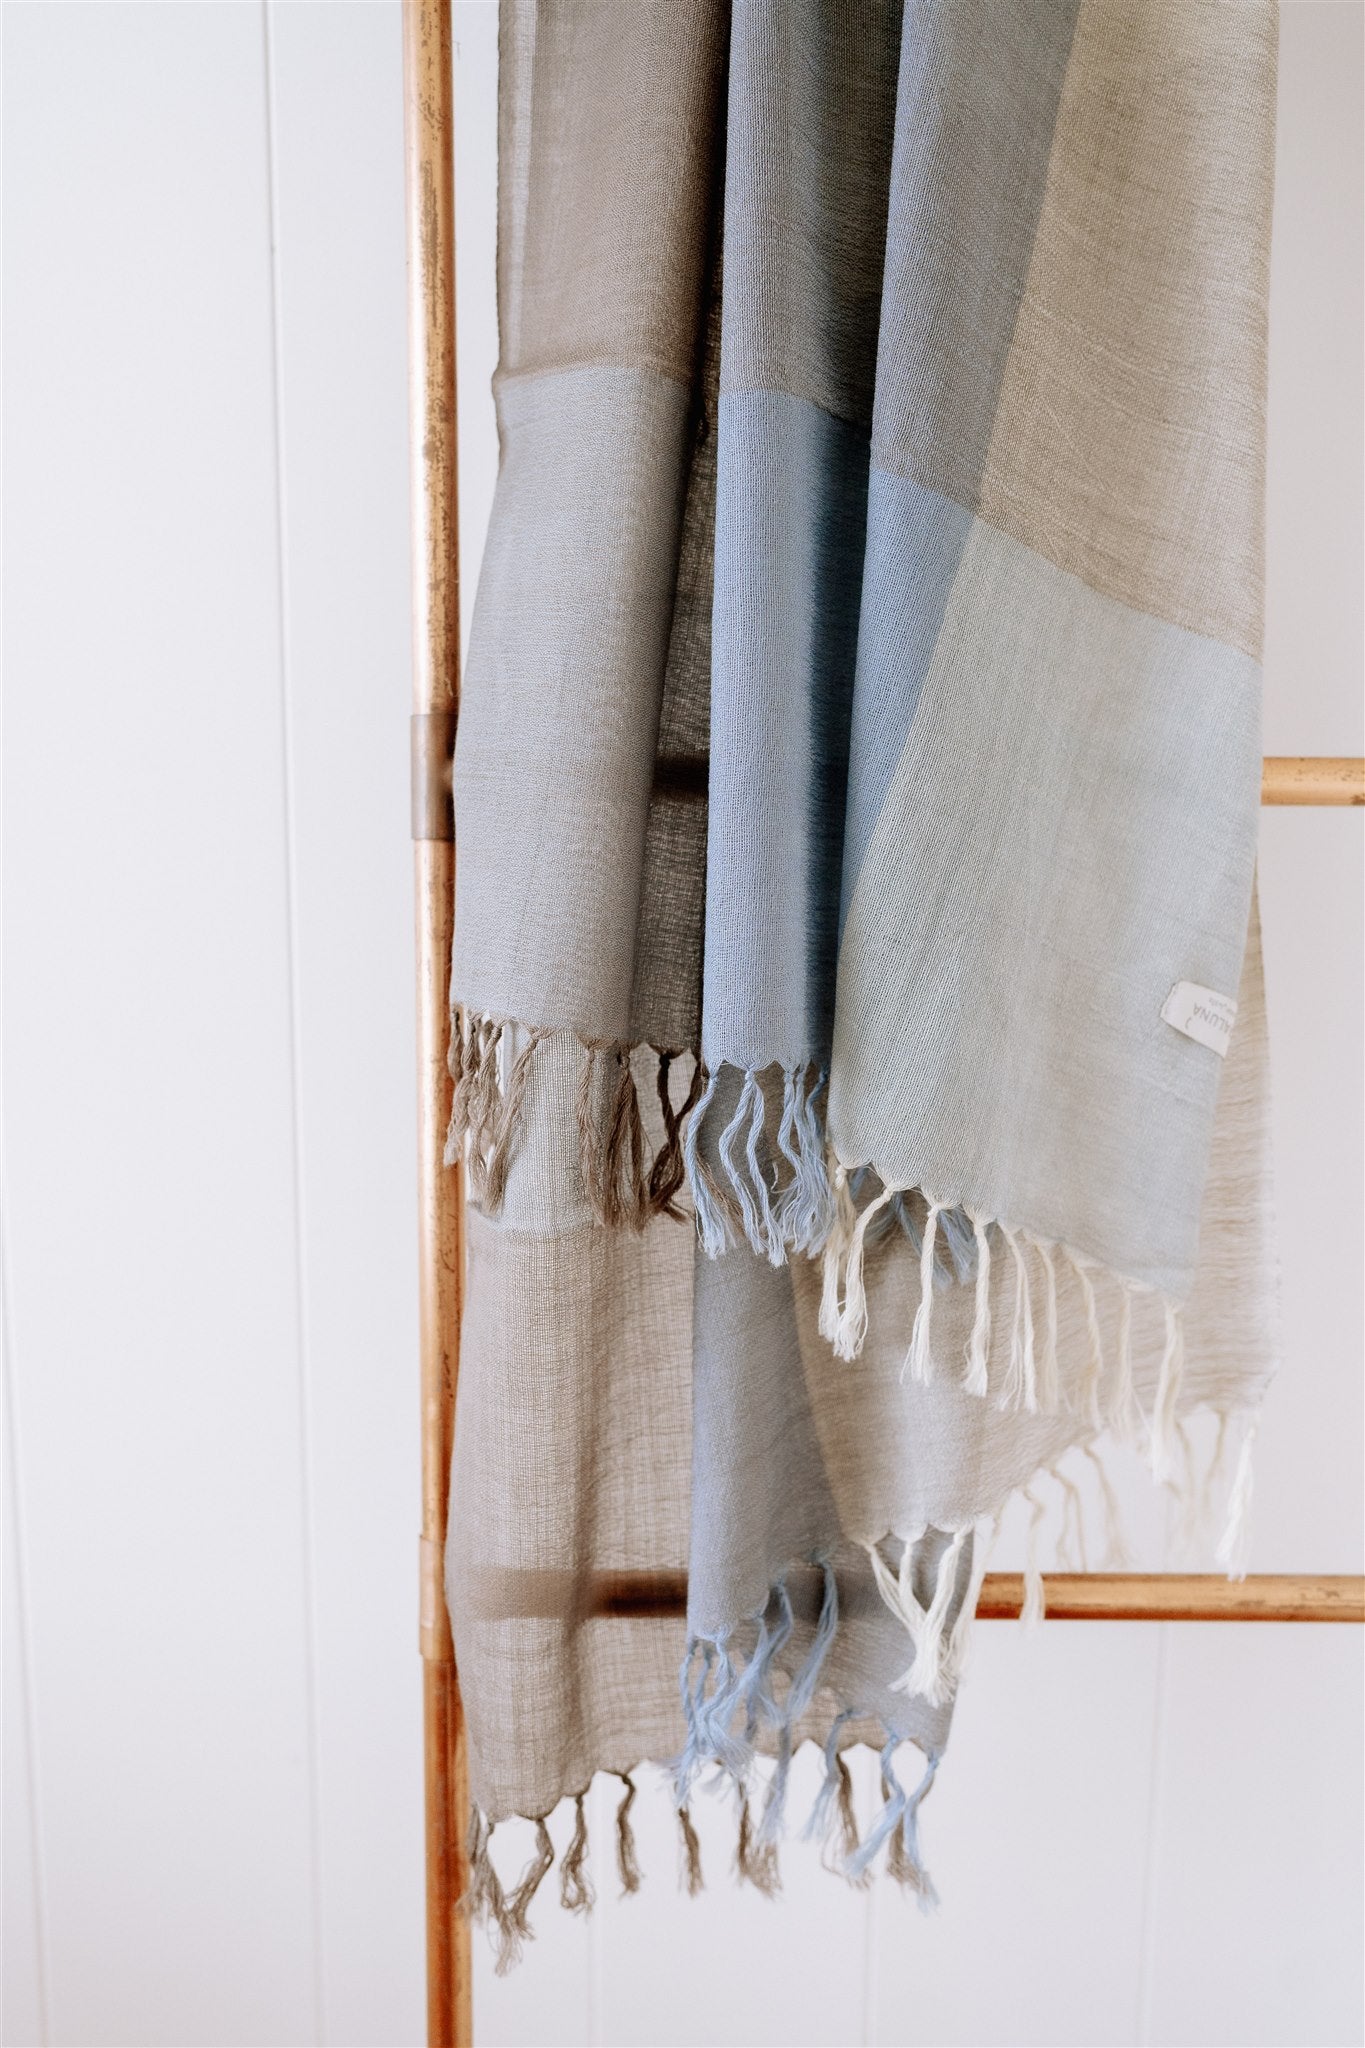 Fine Wool Scarf in Taupe, Cream and Skye Blue